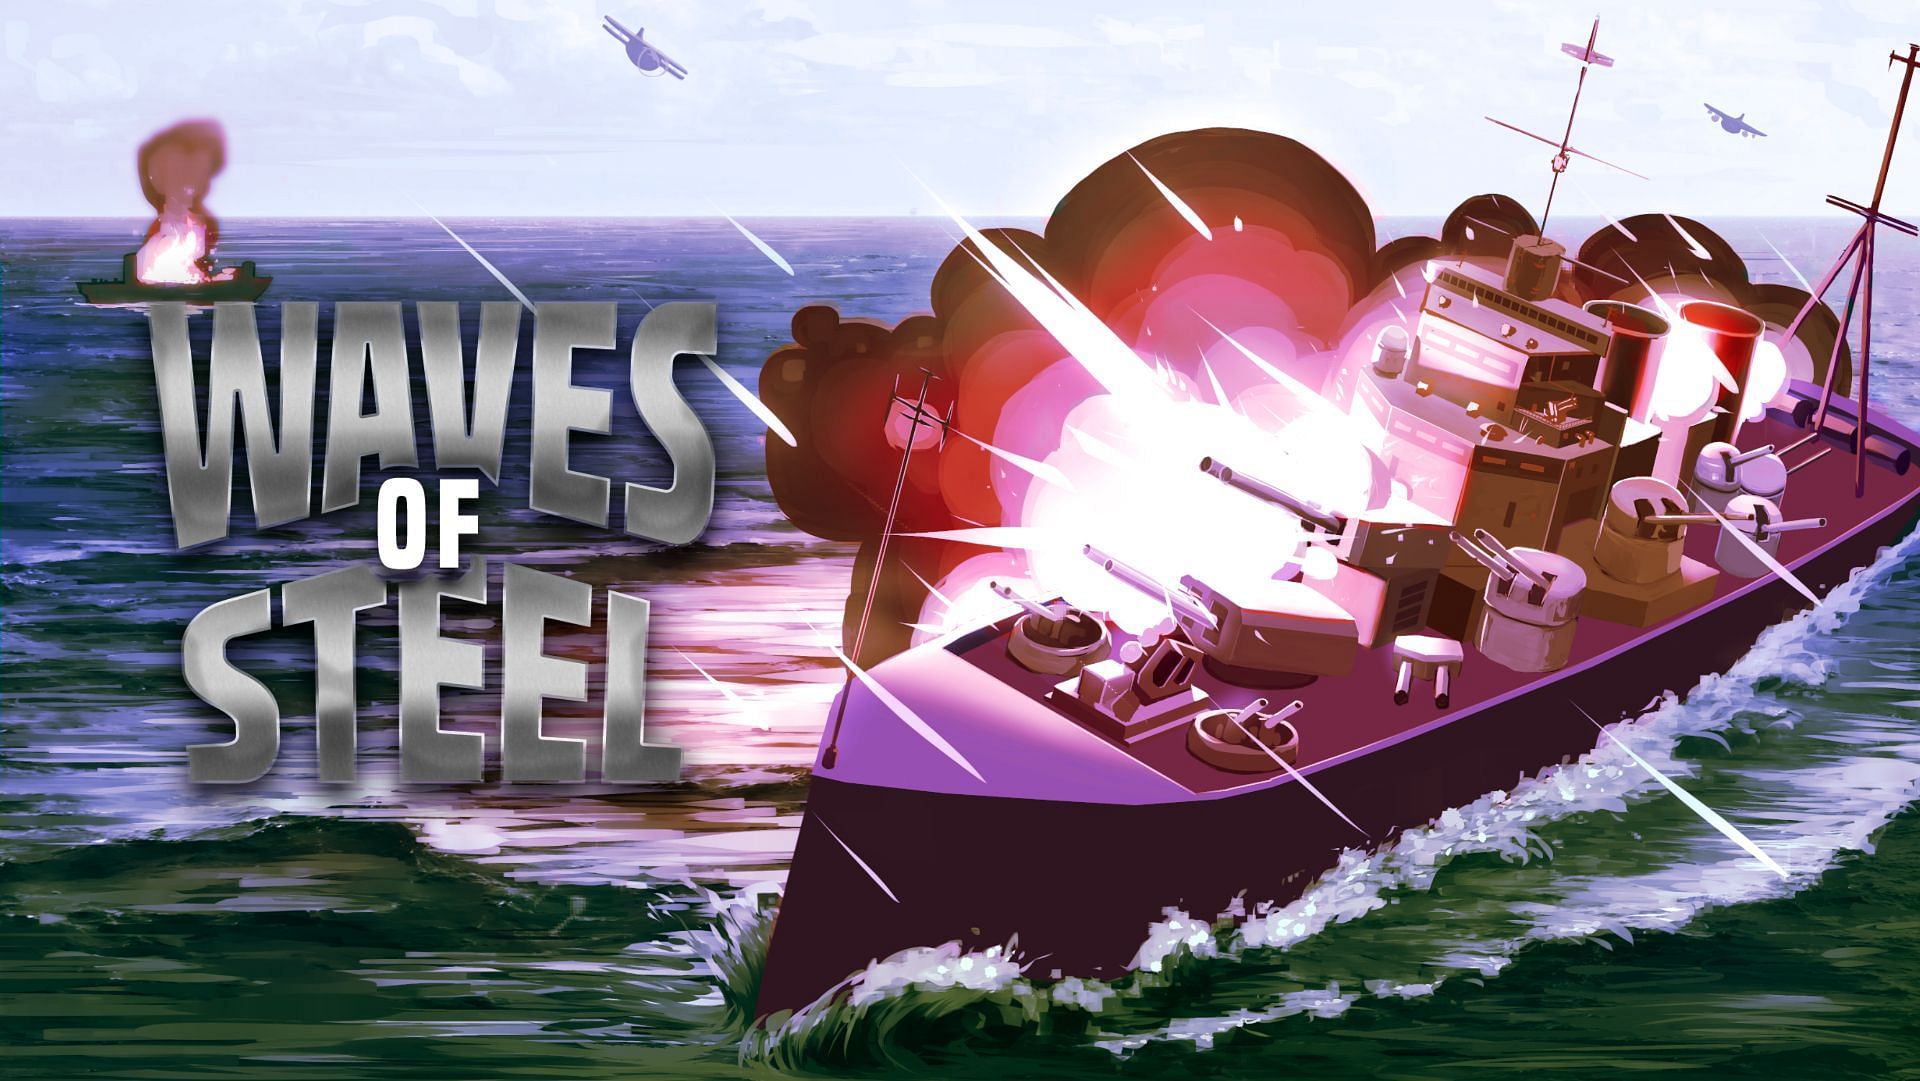 Waves of Steel is an amazing arcade ship combat simulation game, with a few shortcomings (Image via TMA Games)